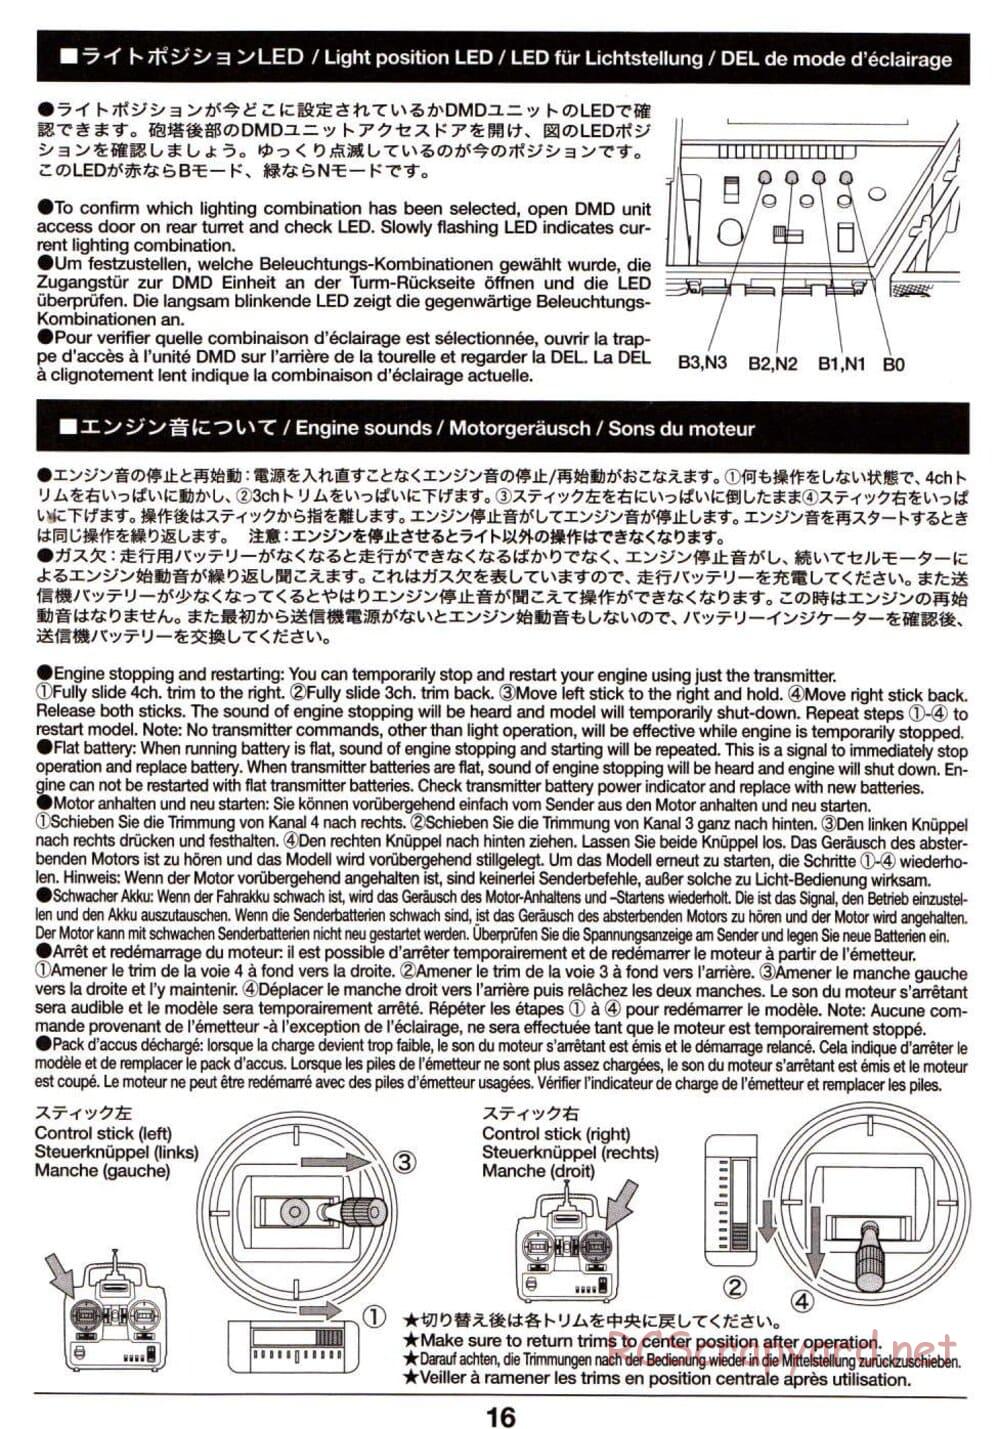 Tamiya - Leopard 2 A6 - 1/16 Scale Chassis - Operation Manual - Page 16